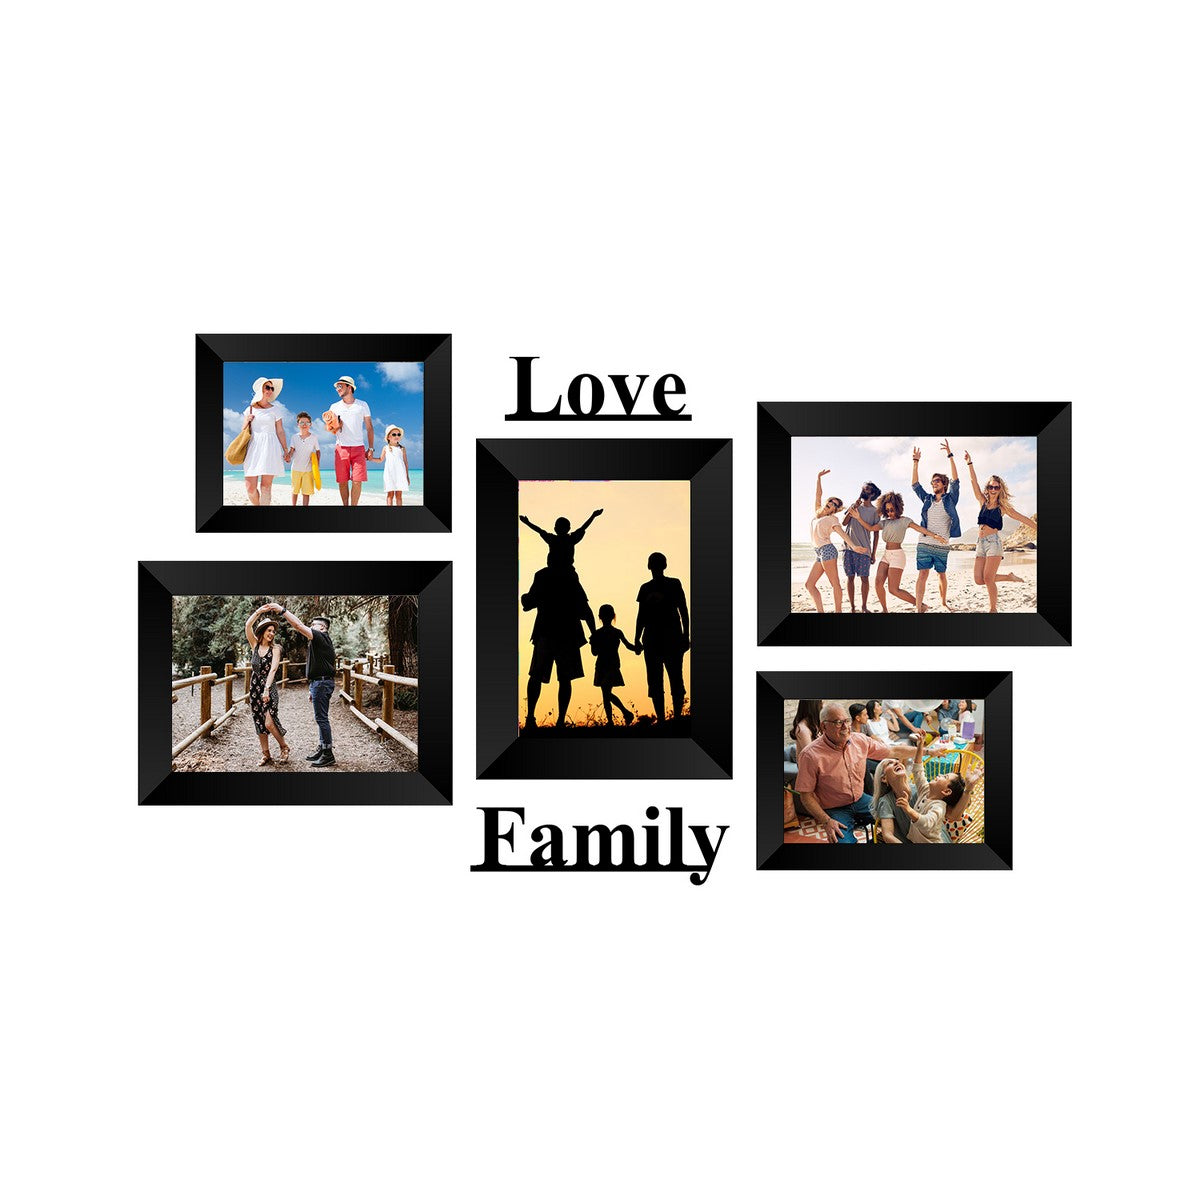 Memory Wall Collage Photo Frame - Set of 5 Photo Frames for 2 Photos of 4"x6", 3 Photos of 5"x7", 1 Piece of LOVE, 1 Piece of FAMILY